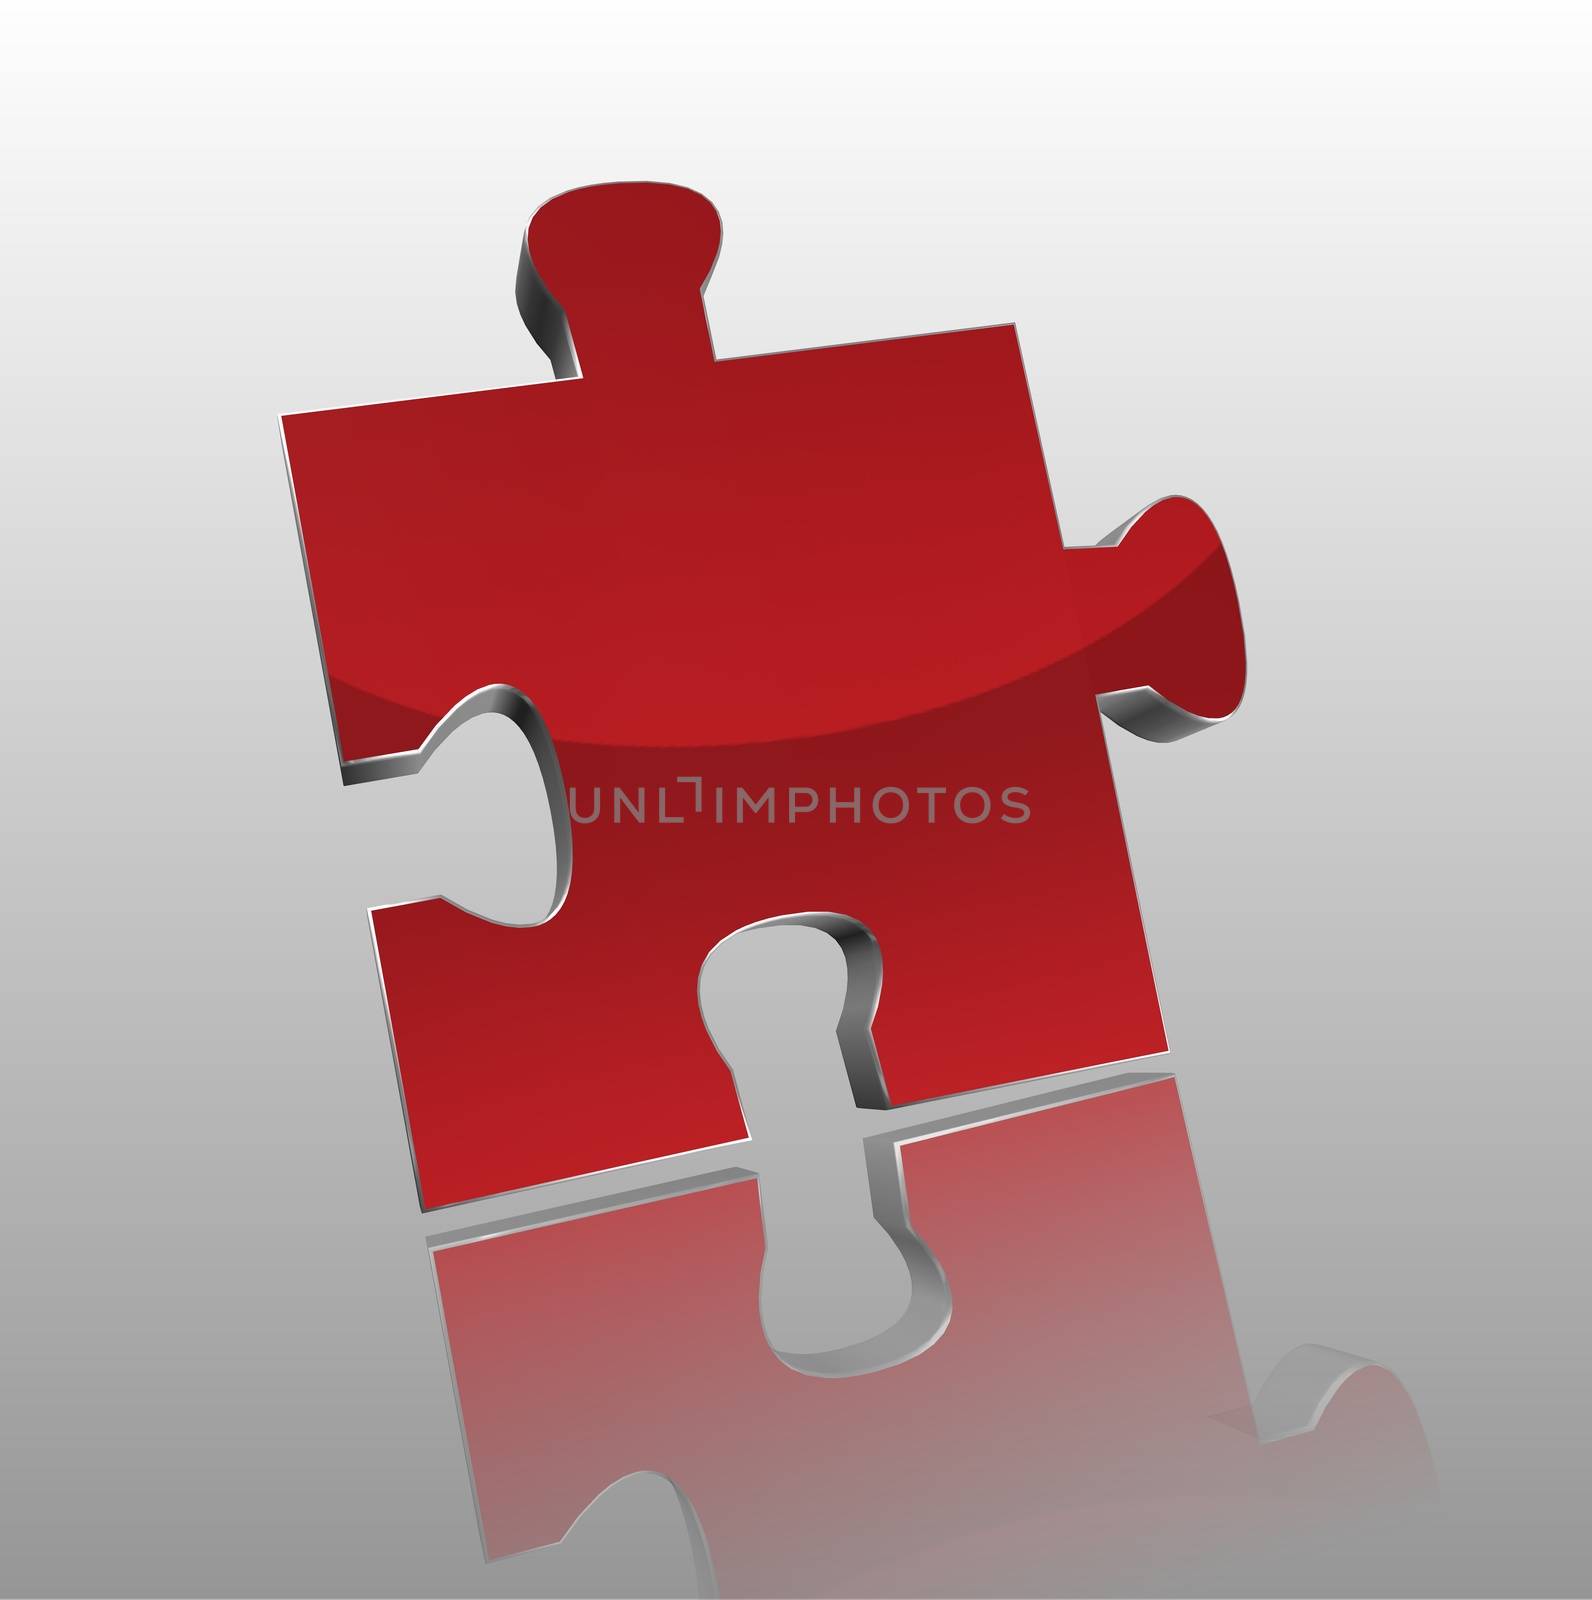 Jigsaw illustrations isolated against a white background